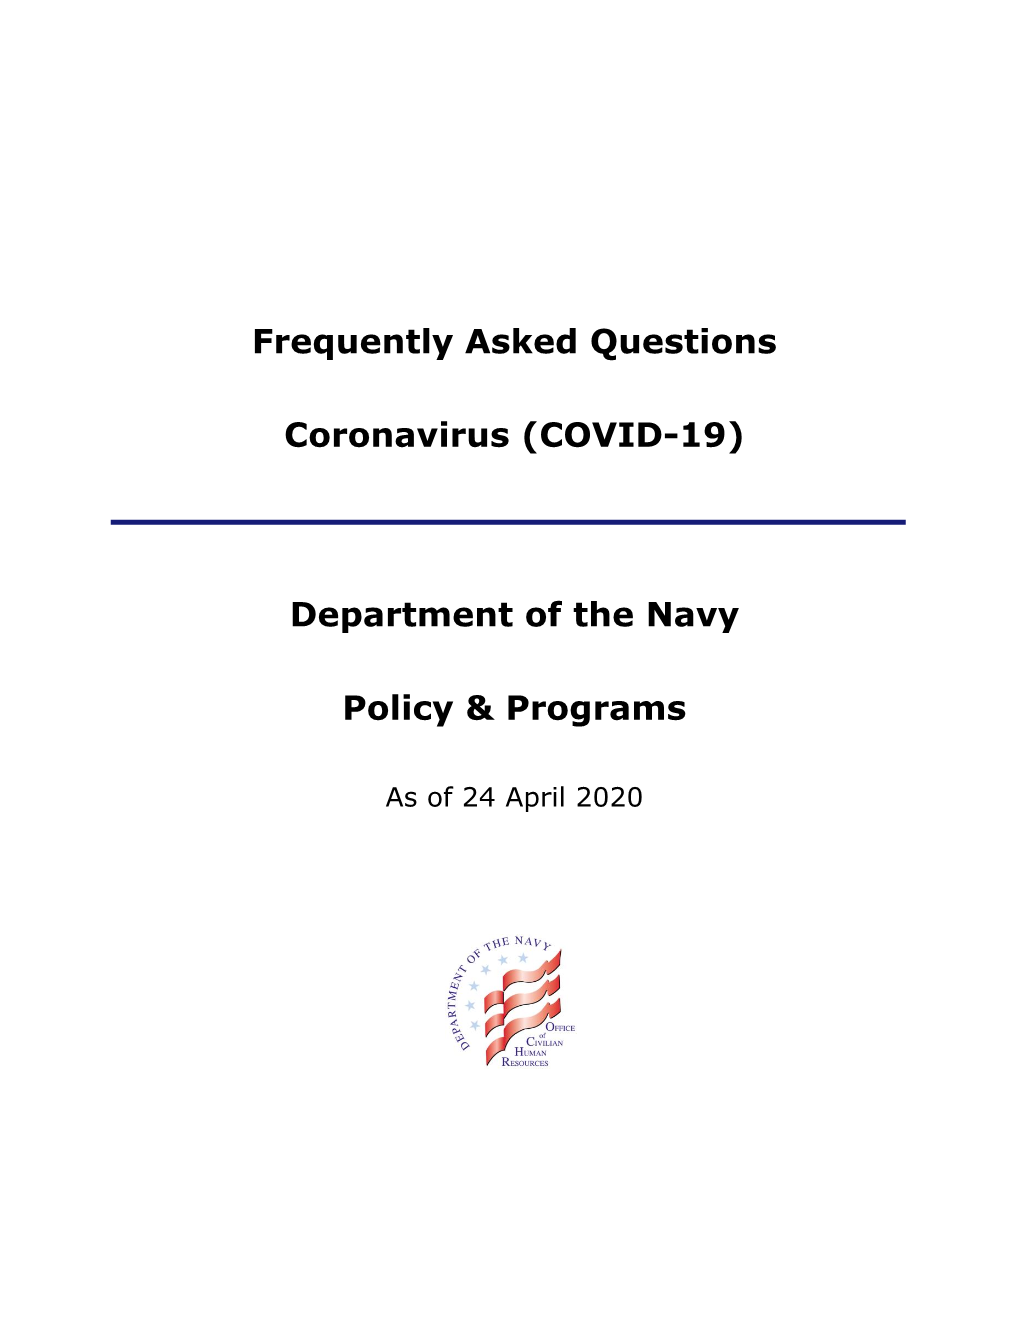 Frequently Asked Questions Coronavirus (COVID-19)